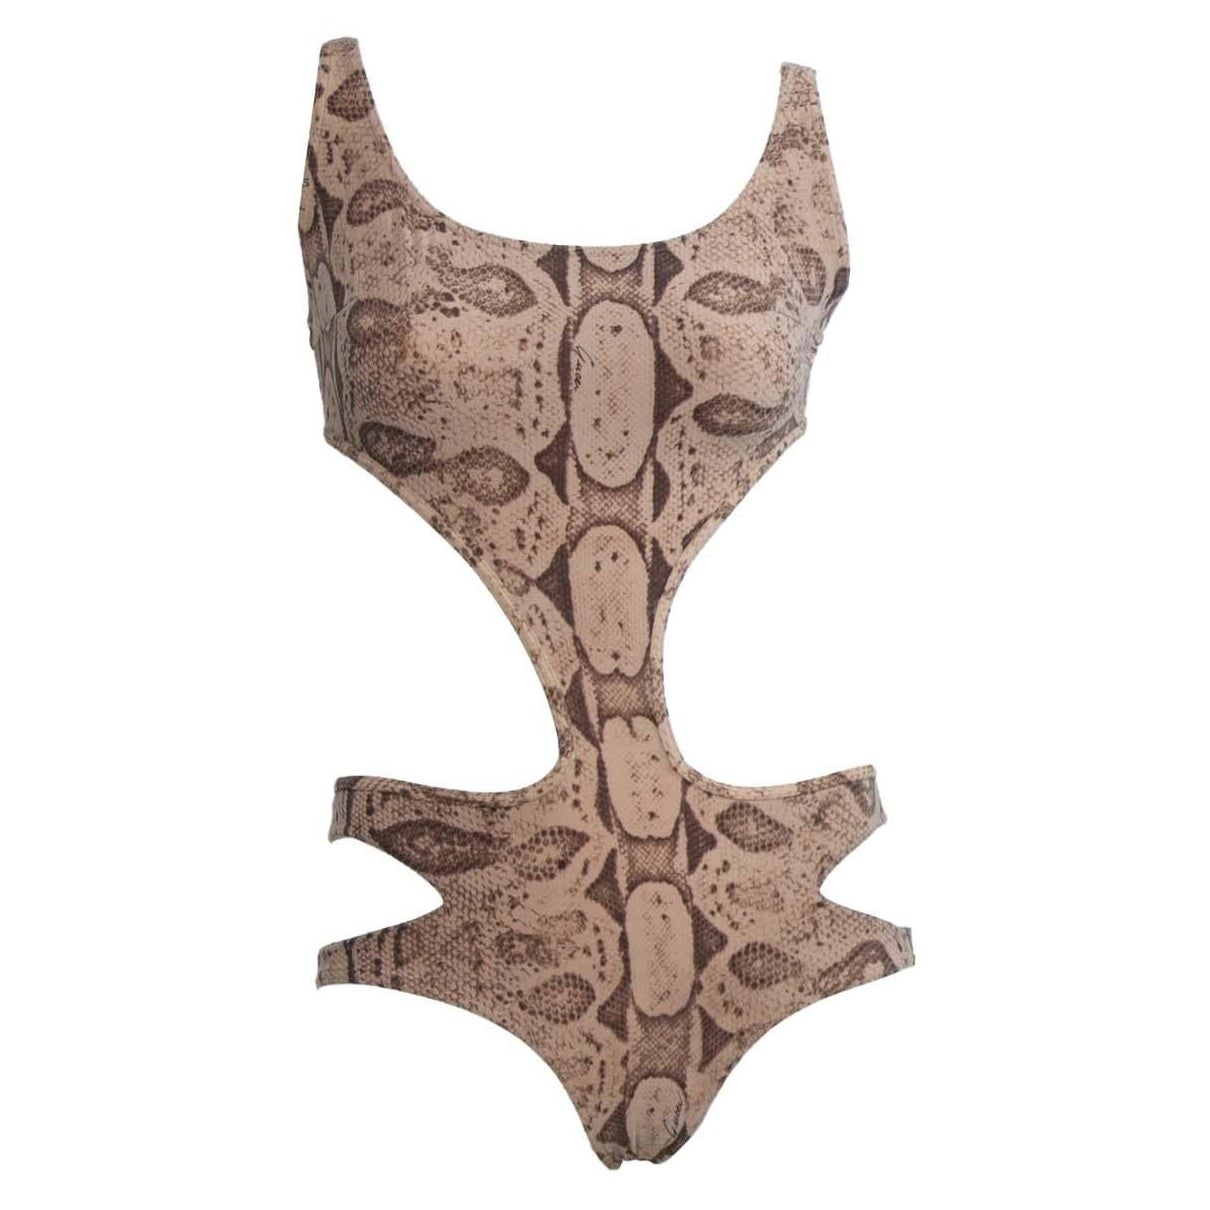 S/S 2000 Gucci by Tom Ford Snake Print One Piece Cutout Bathing Suit For Sale